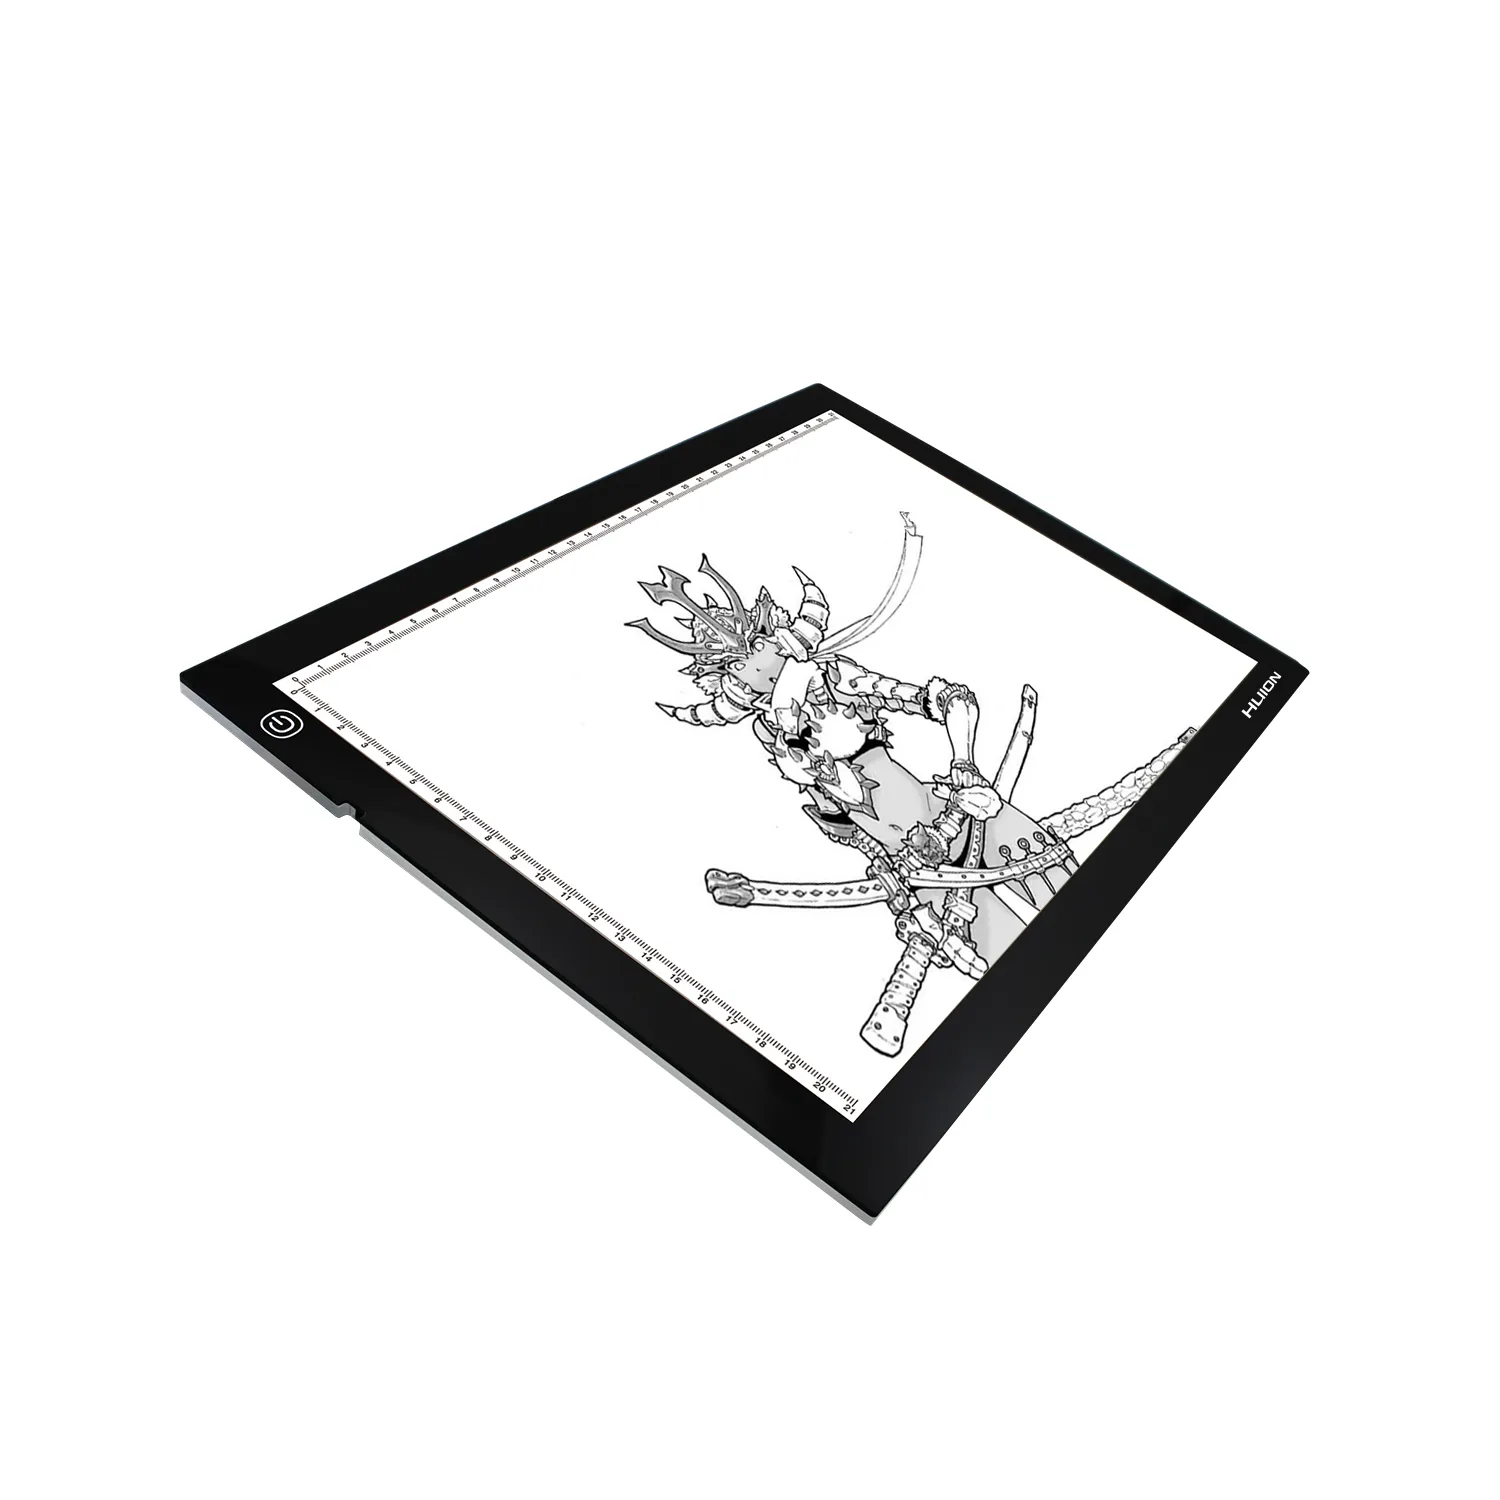 REVIEW: Huion LB4 rechargeable LED light pad 